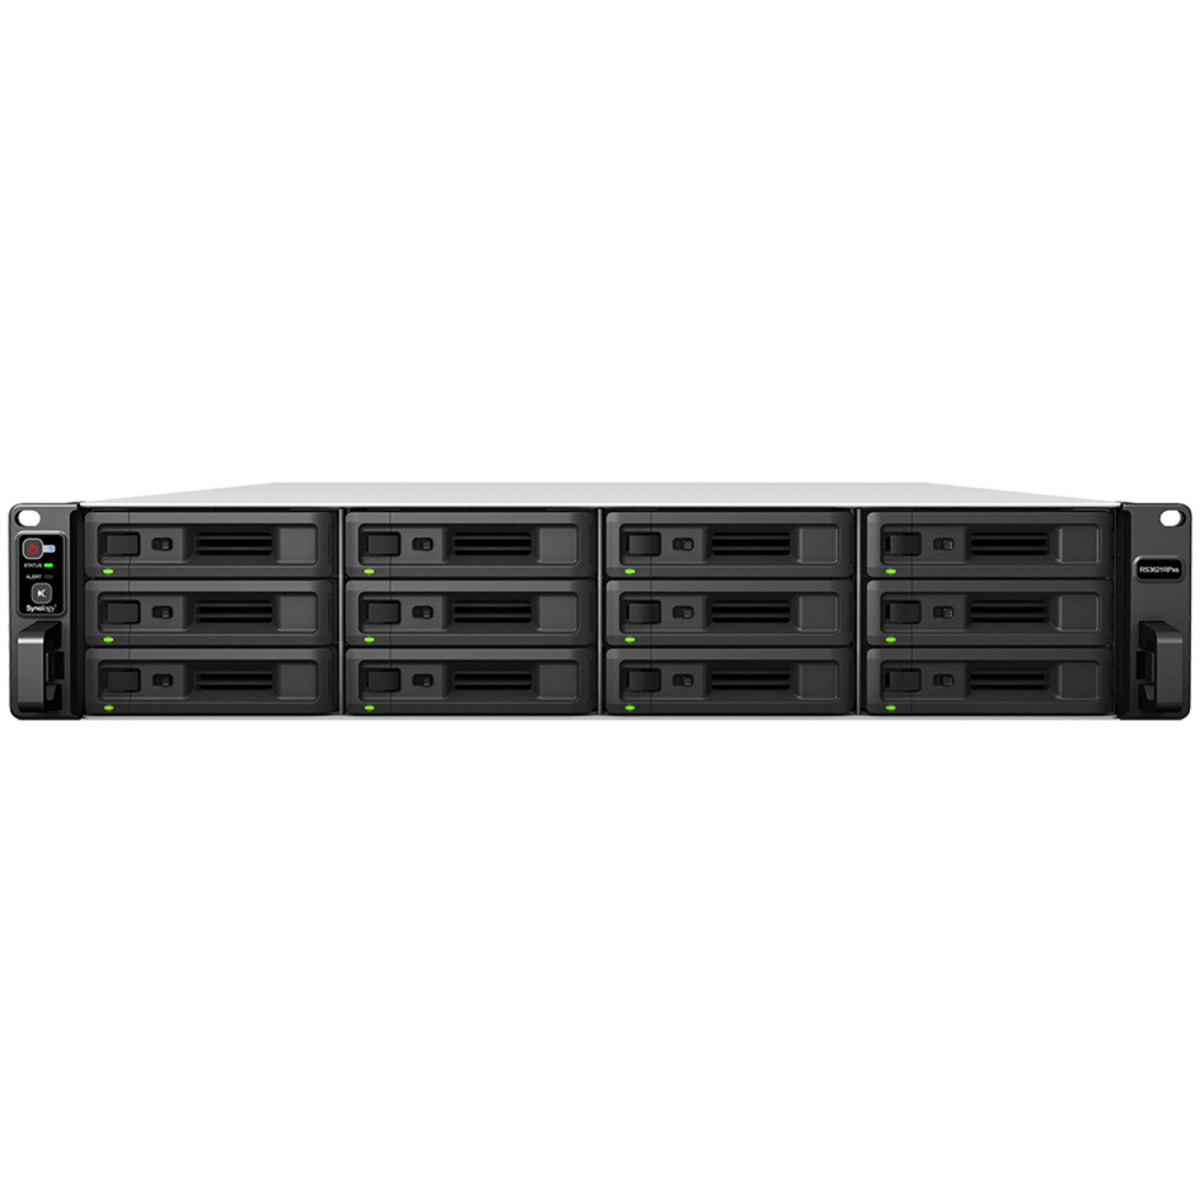 buy $9508 Synology RackStation RS3621RPxs 216tb RackMount NAS - Network Attached Storage Device 12x18000gb Toshiba Enterprise Capacity MG09ACA18TE 3.5 7200rpm SATA 6Gb/s HDD ENTERPRISE Class Drives Installed - Burn-In Tested - nas headquarters buy network attached storage server device das new raid-5 free shipping usa christmas new year holiday sale RackStation RS3621RPxs